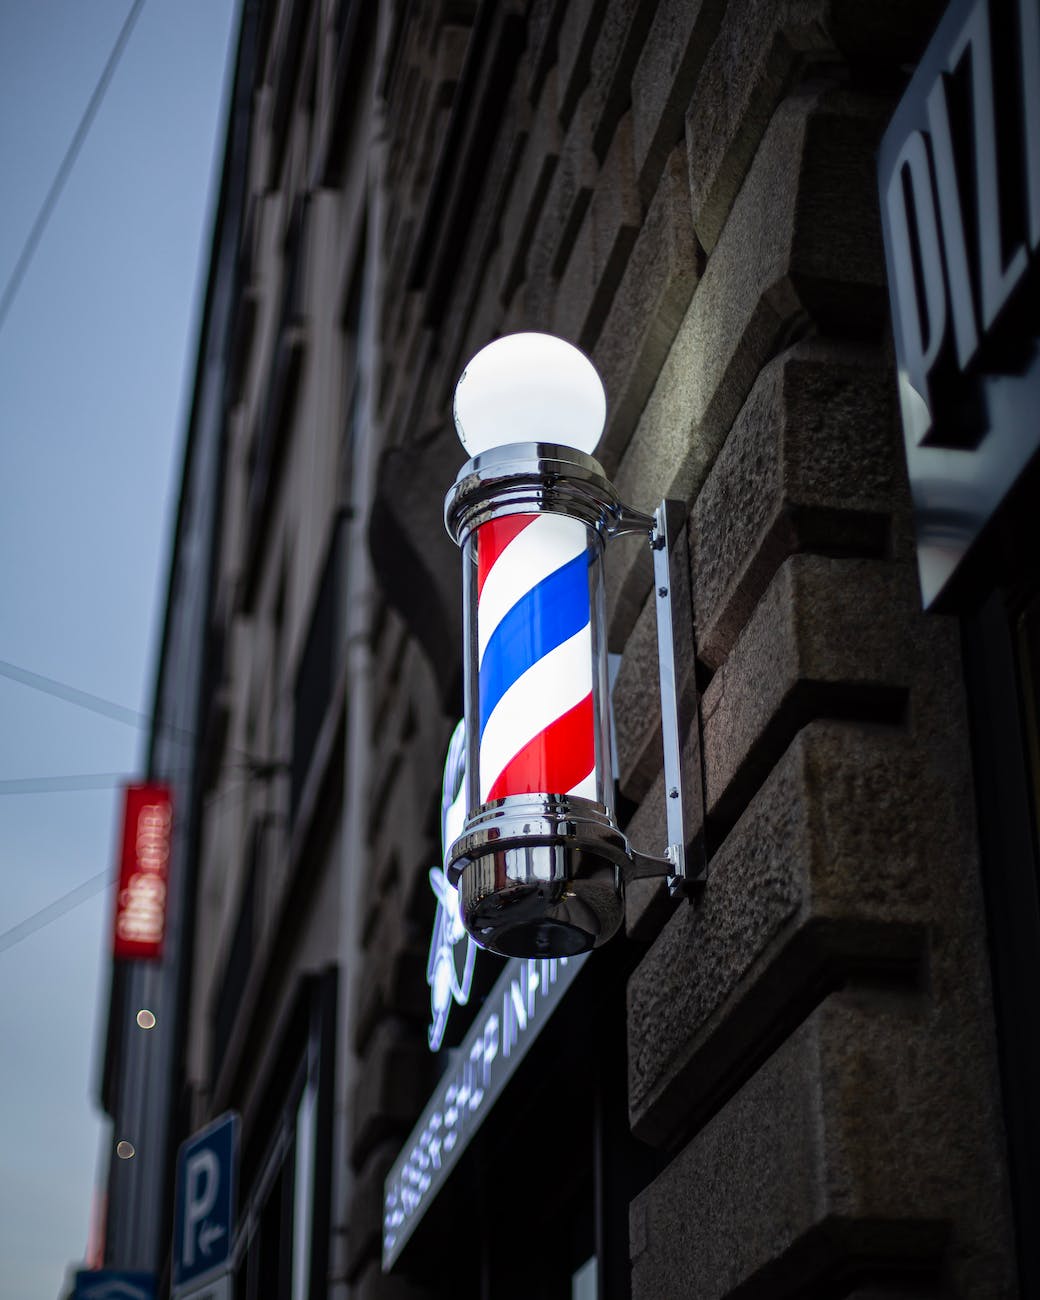 a barber pole on the wall